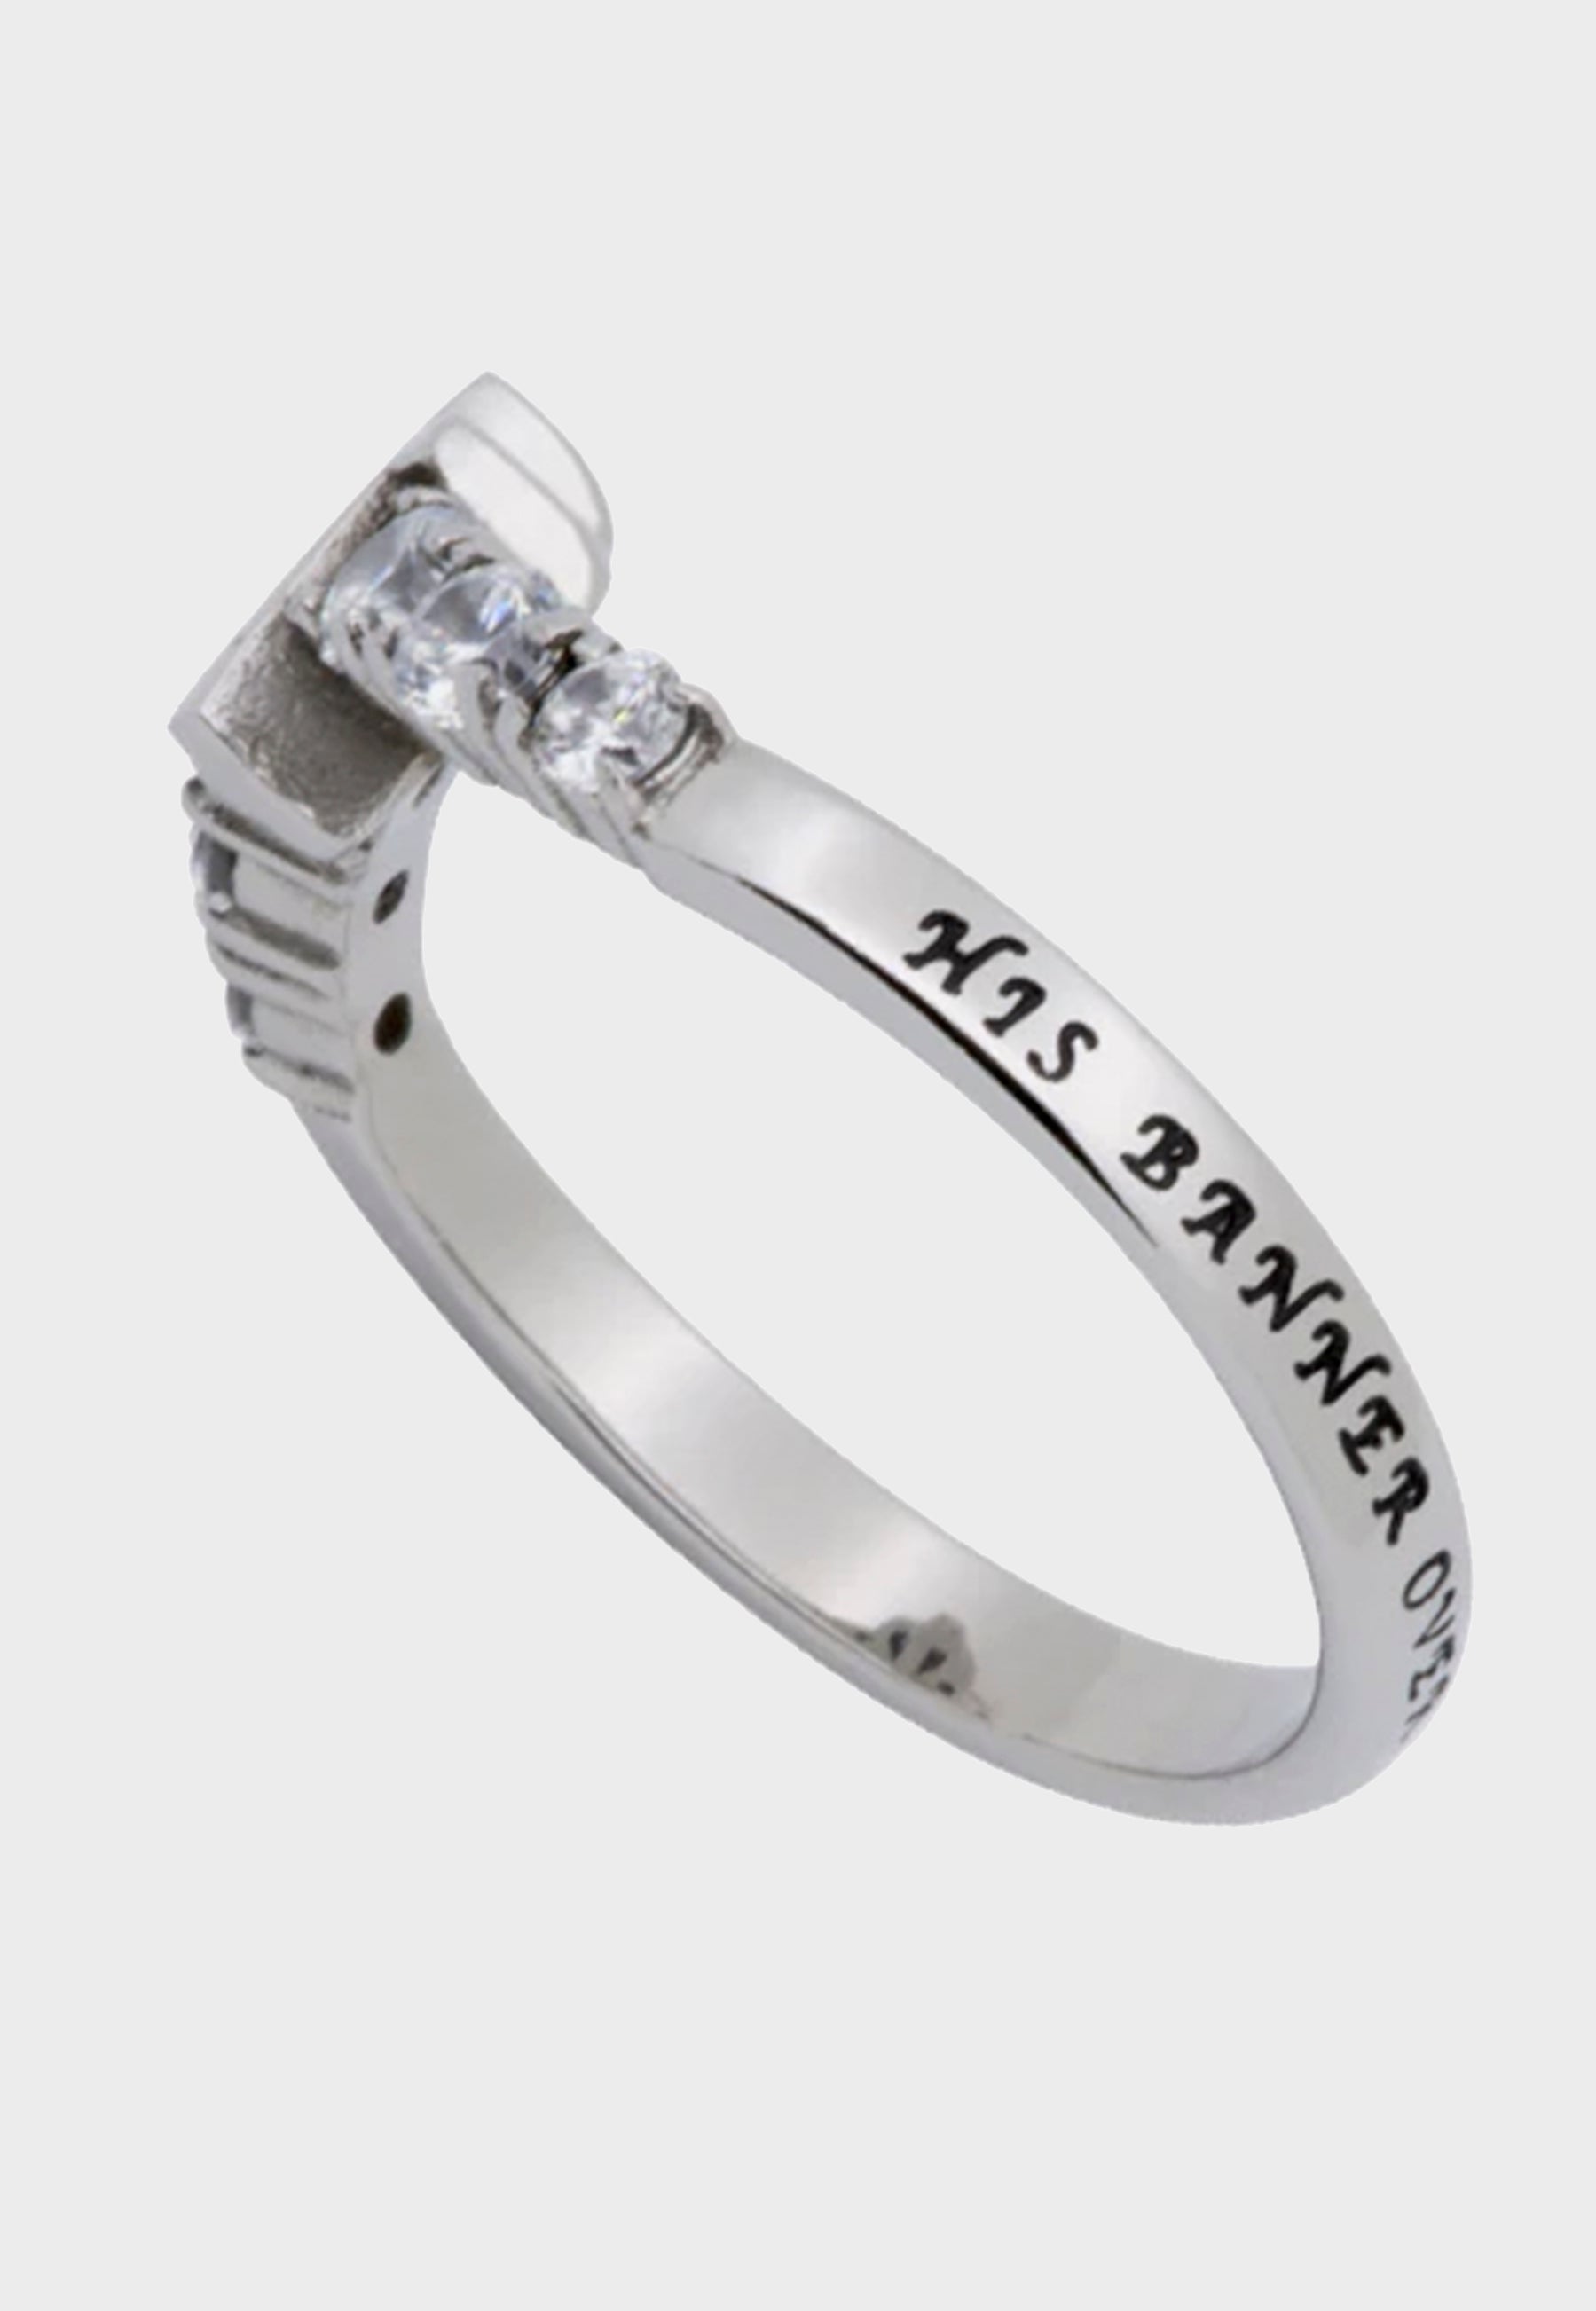 Side view of women's Christian ring with Bible verse